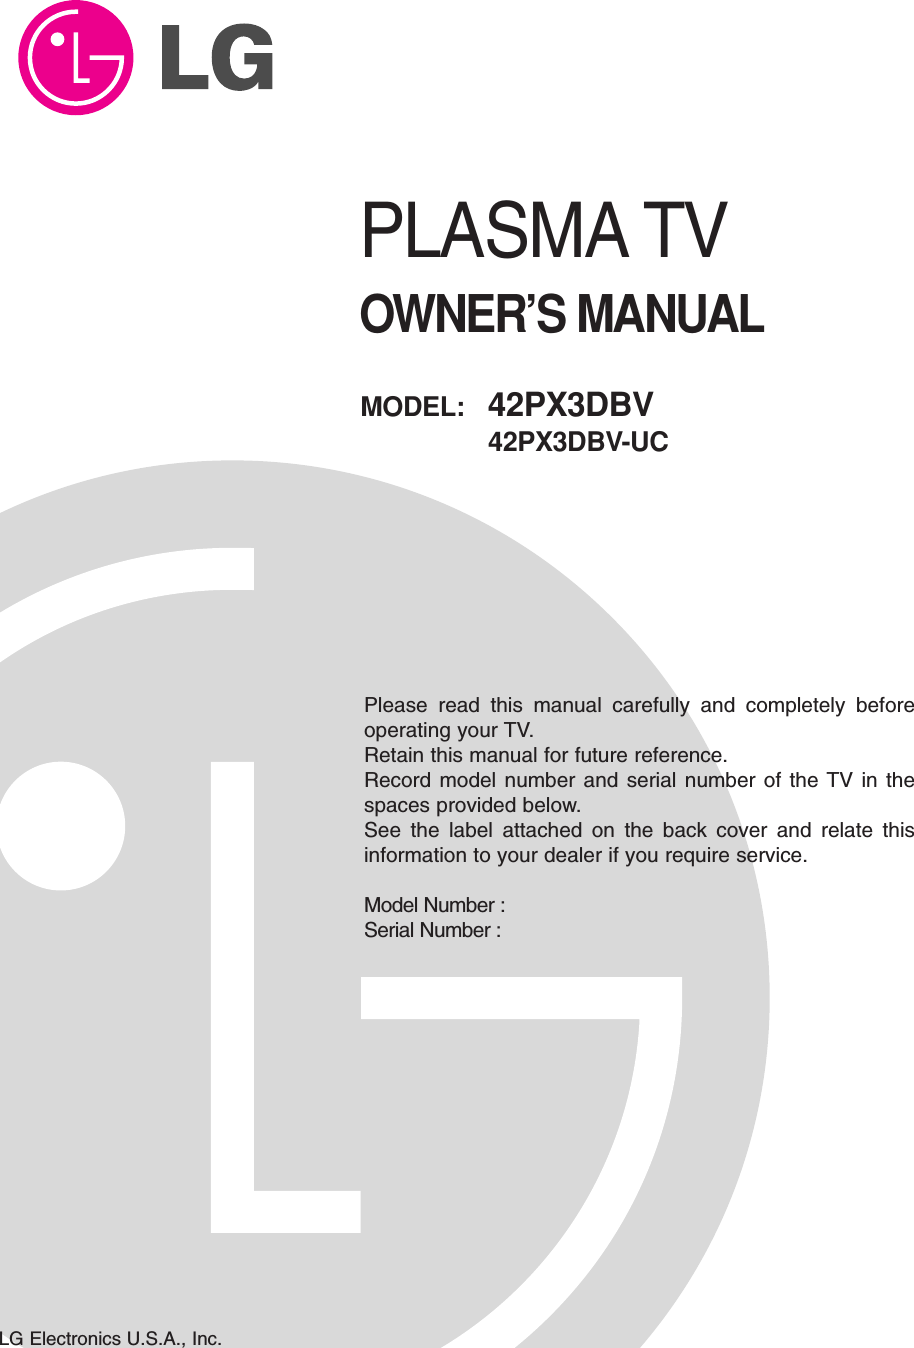 PLASMA TVOWNER’S MANUALPlease read this manual carefully and completely beforeoperating your TV. Retain this manual for future reference.Record model number and serial number of the TV in thespaces provided below. See the label attached on the back cover and relate thisinformation to your dealer if you require service.Model Number : Serial Number : MODEL:   42PX3DBV42PX3DBV-UCLG Electronics U.S.A., Inc.